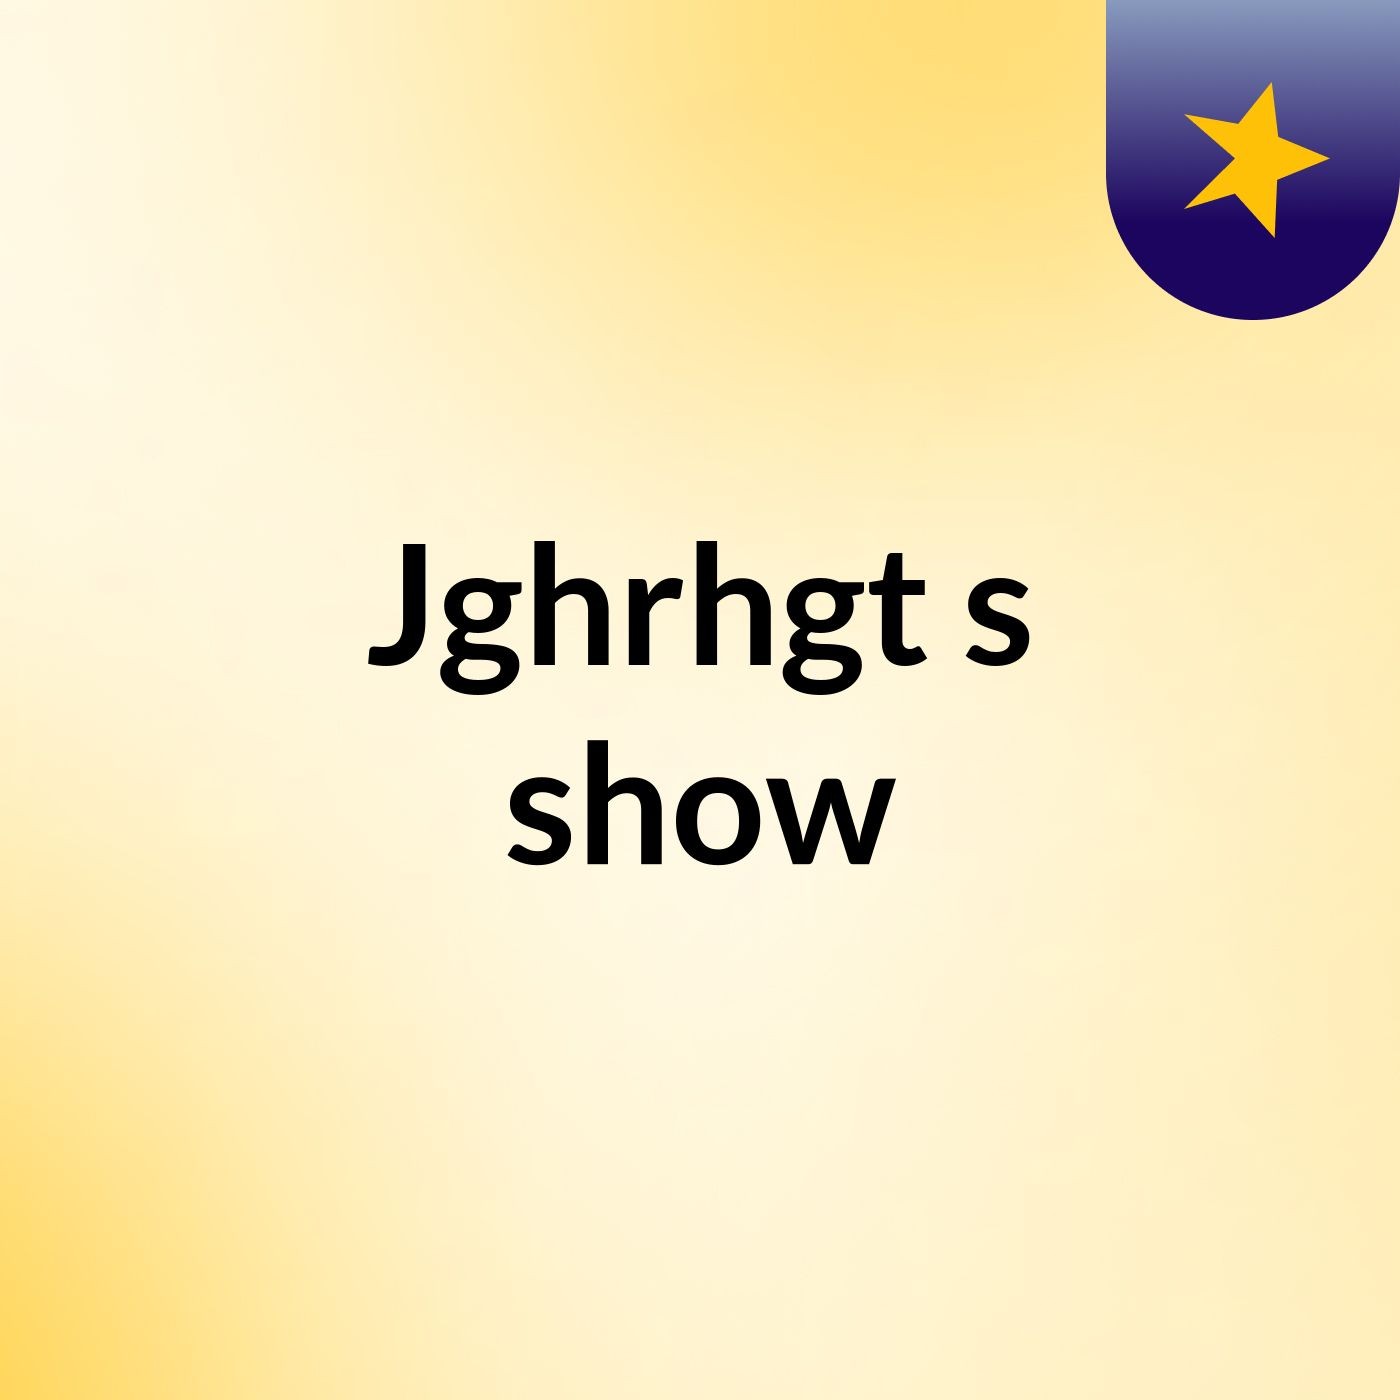 Jghrhgt's show